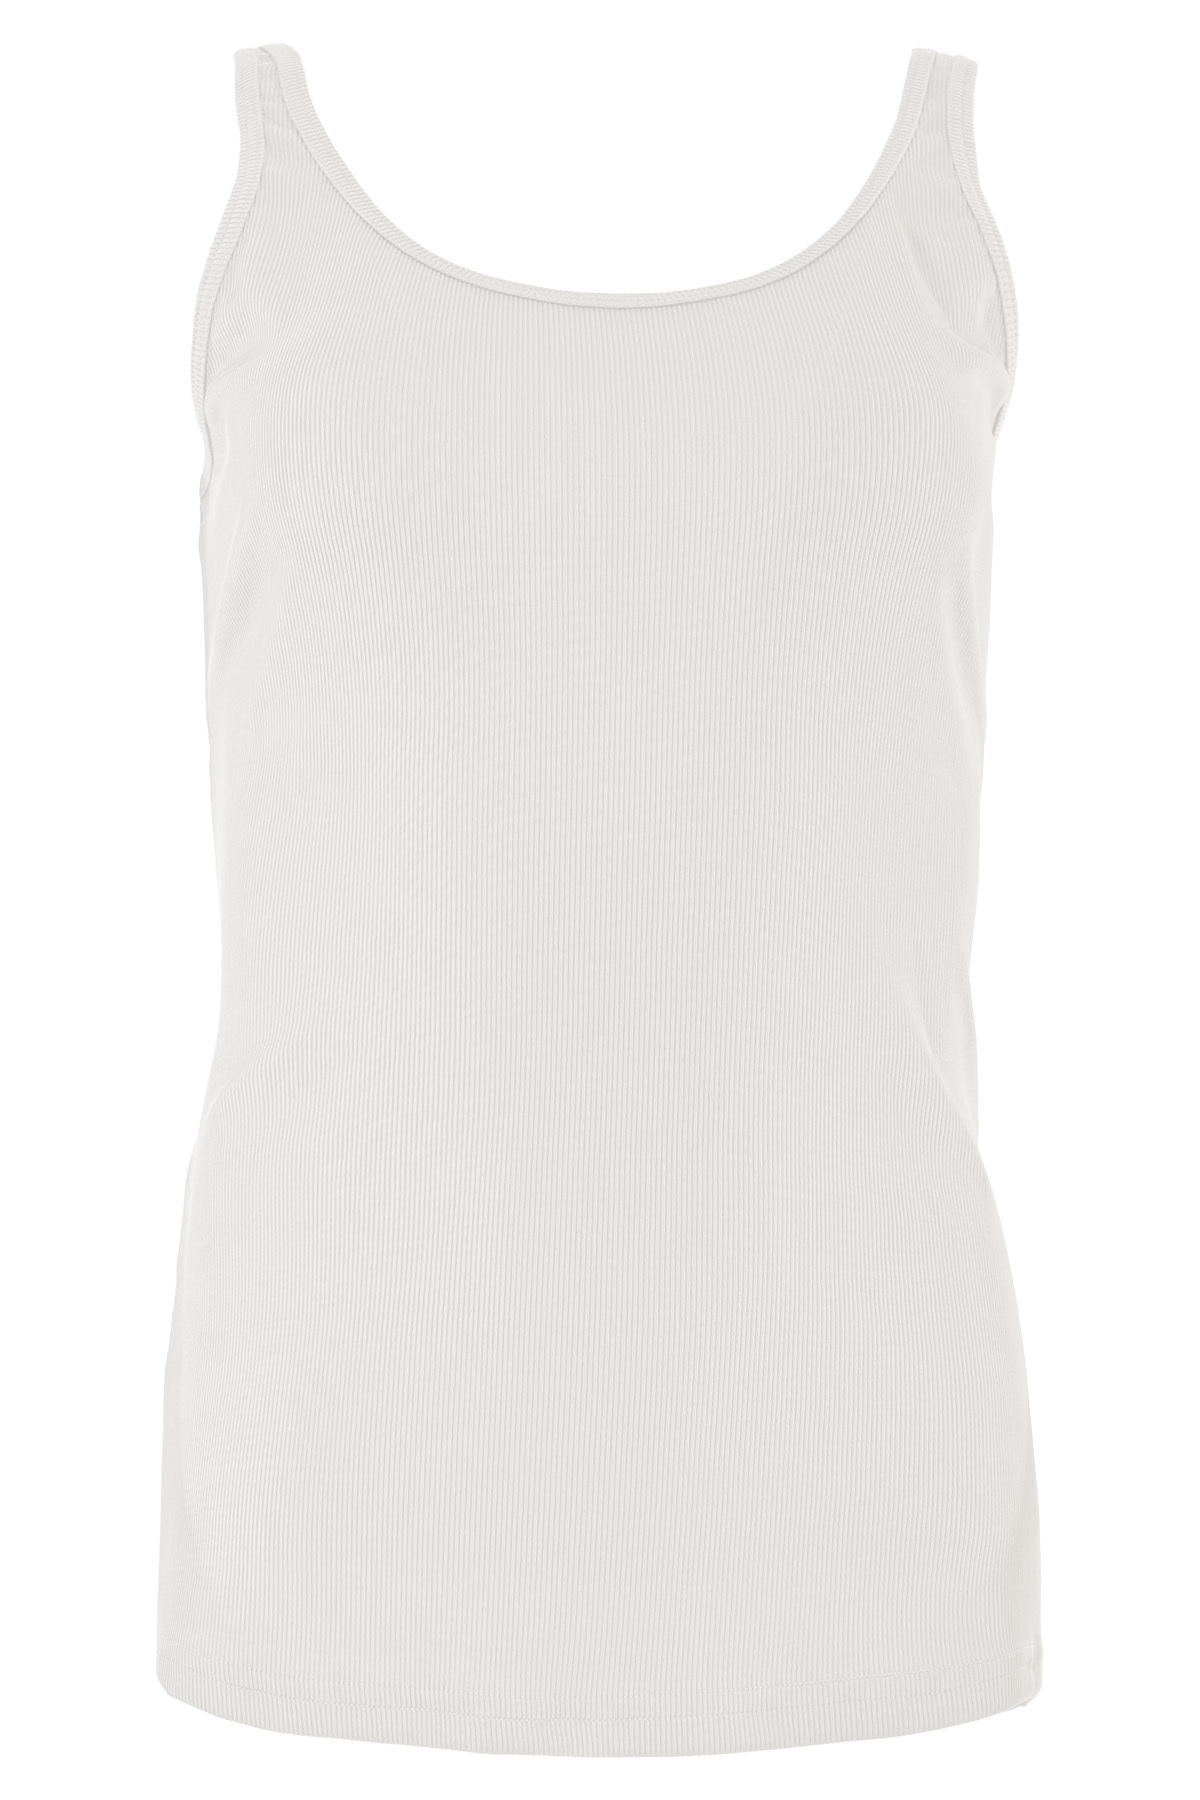 MAICAZZ Top Florence Offwhite